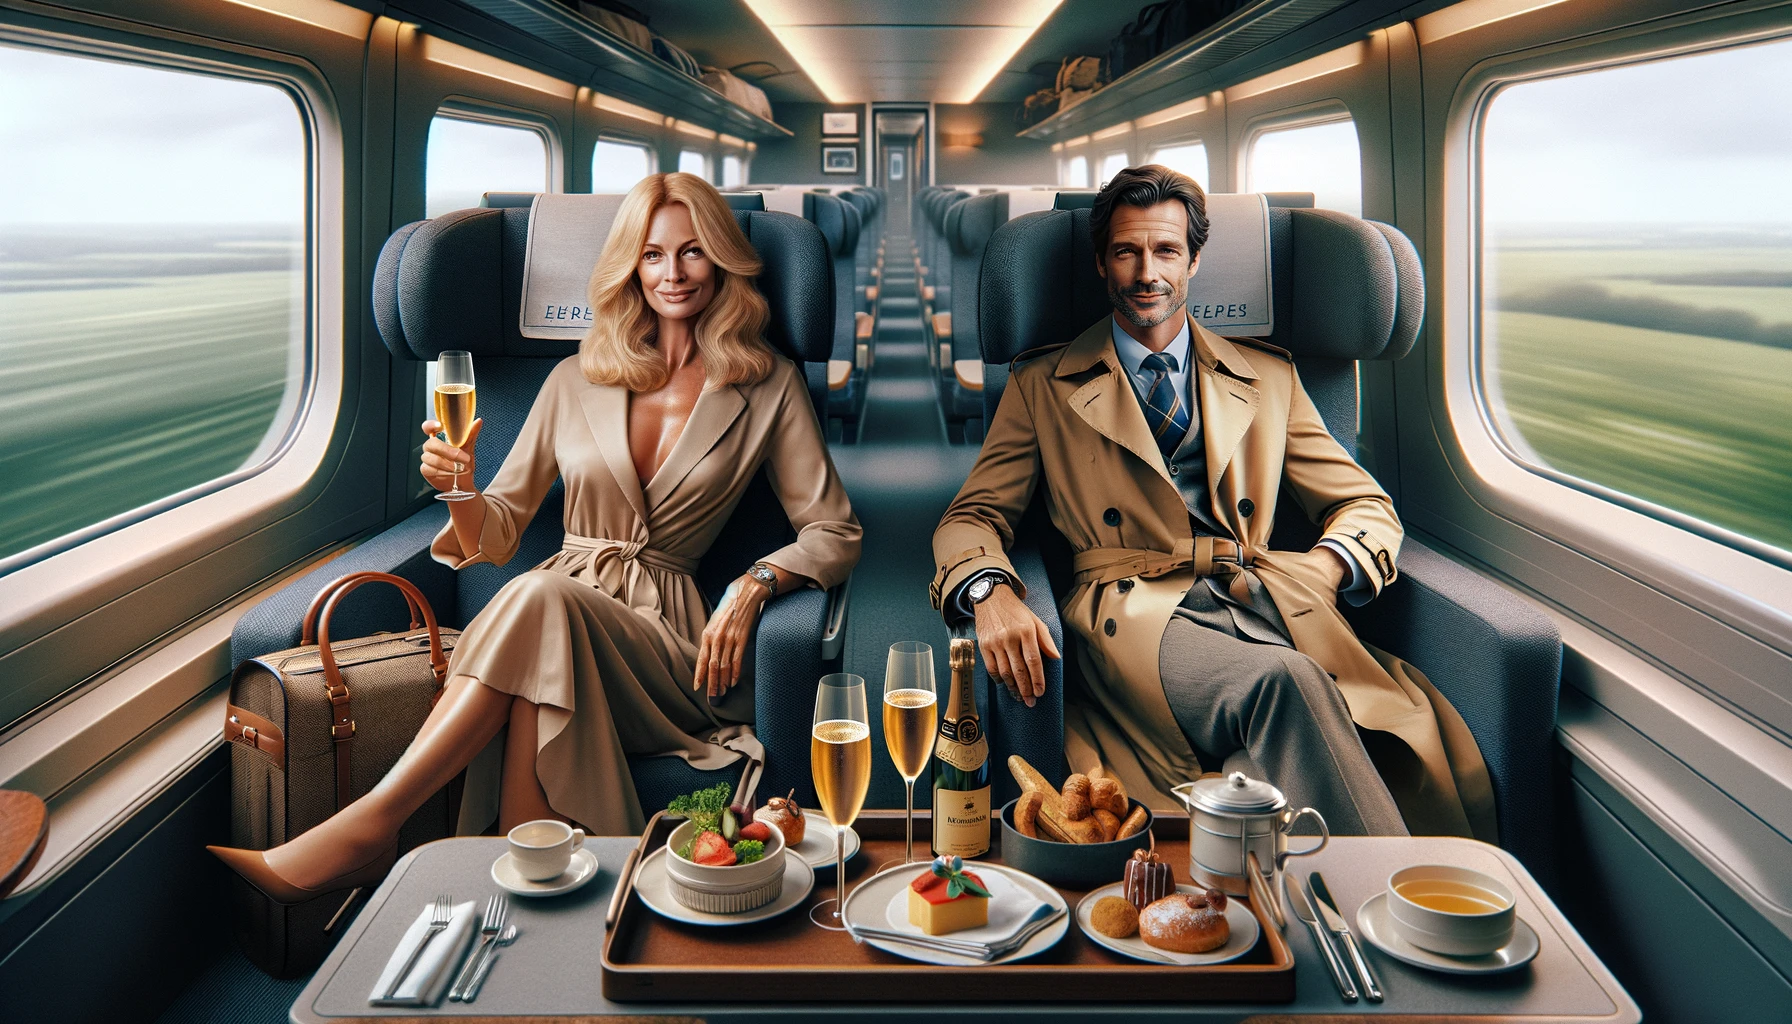  Doug and Kathy Fields traveling First Class on the Eurostar from Paris to London